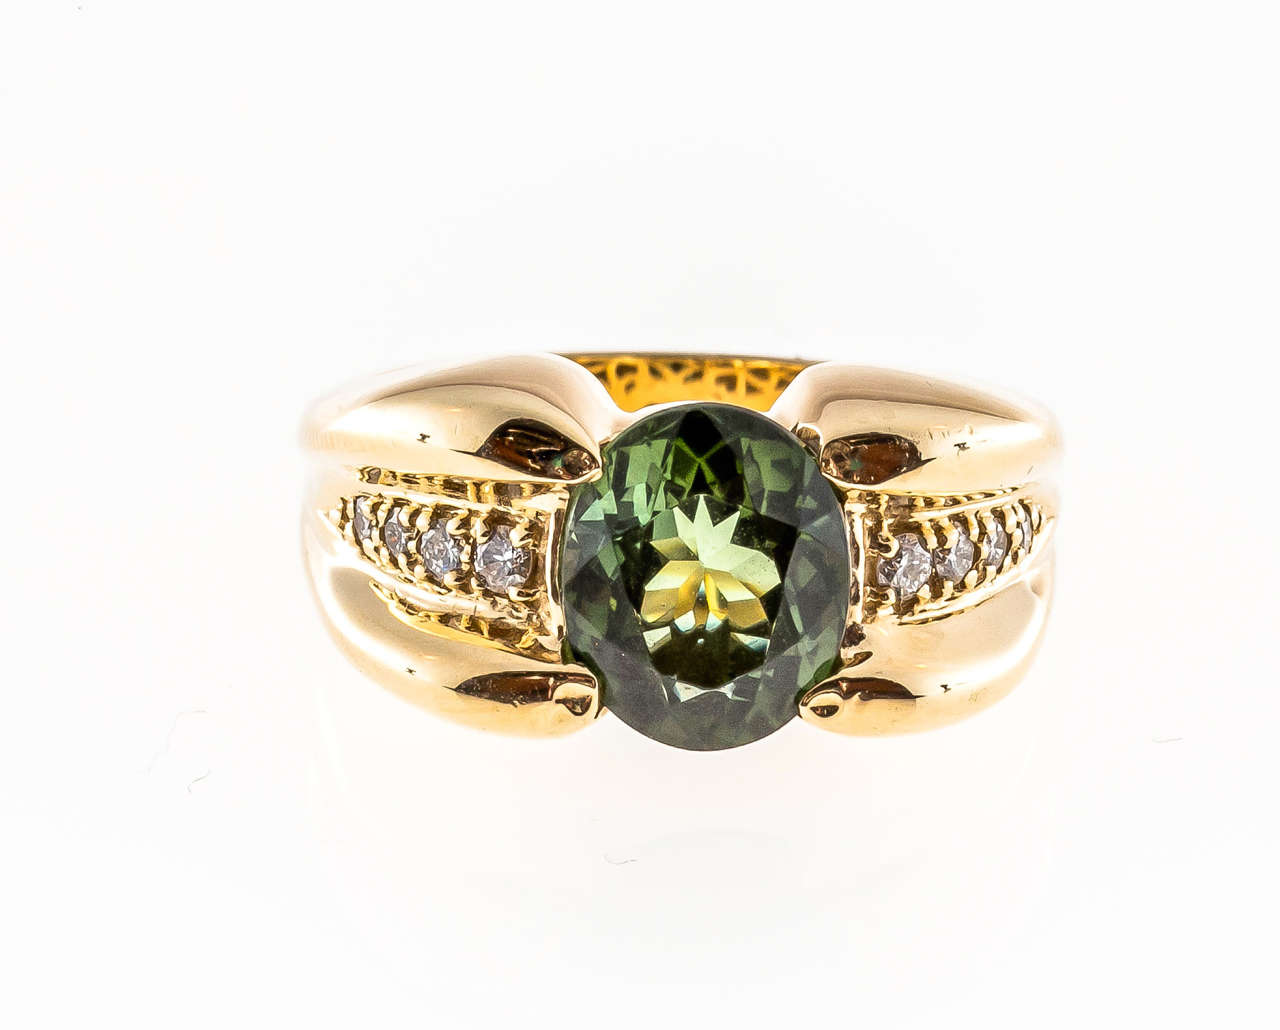 Sonia B oval green Tourmaline ring with raised top and white diamond accents.

1 Oval genuine green Tourmaline 10 x 8mm, approx. total weight 2.90cts
8 full cut round diamonds, approx. total weight .15cts, G-H, VS2-SI1
Stamped: Sonia B 14k
9.3